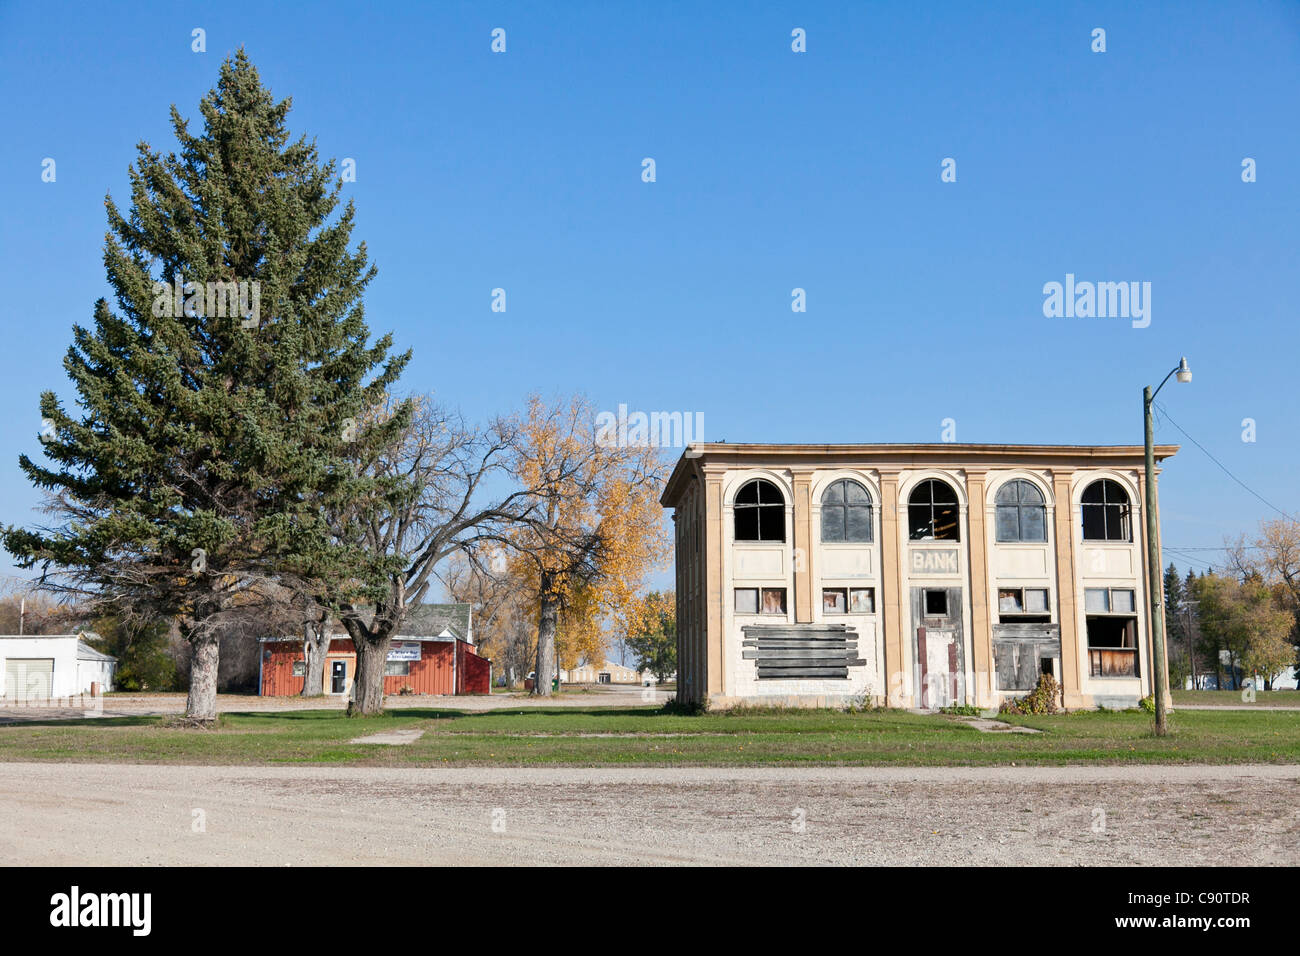 Abandoned bank building in a small city, shrinking cities, Maxbass, Minot, North Dakota, United States of America, USA Stock Photo